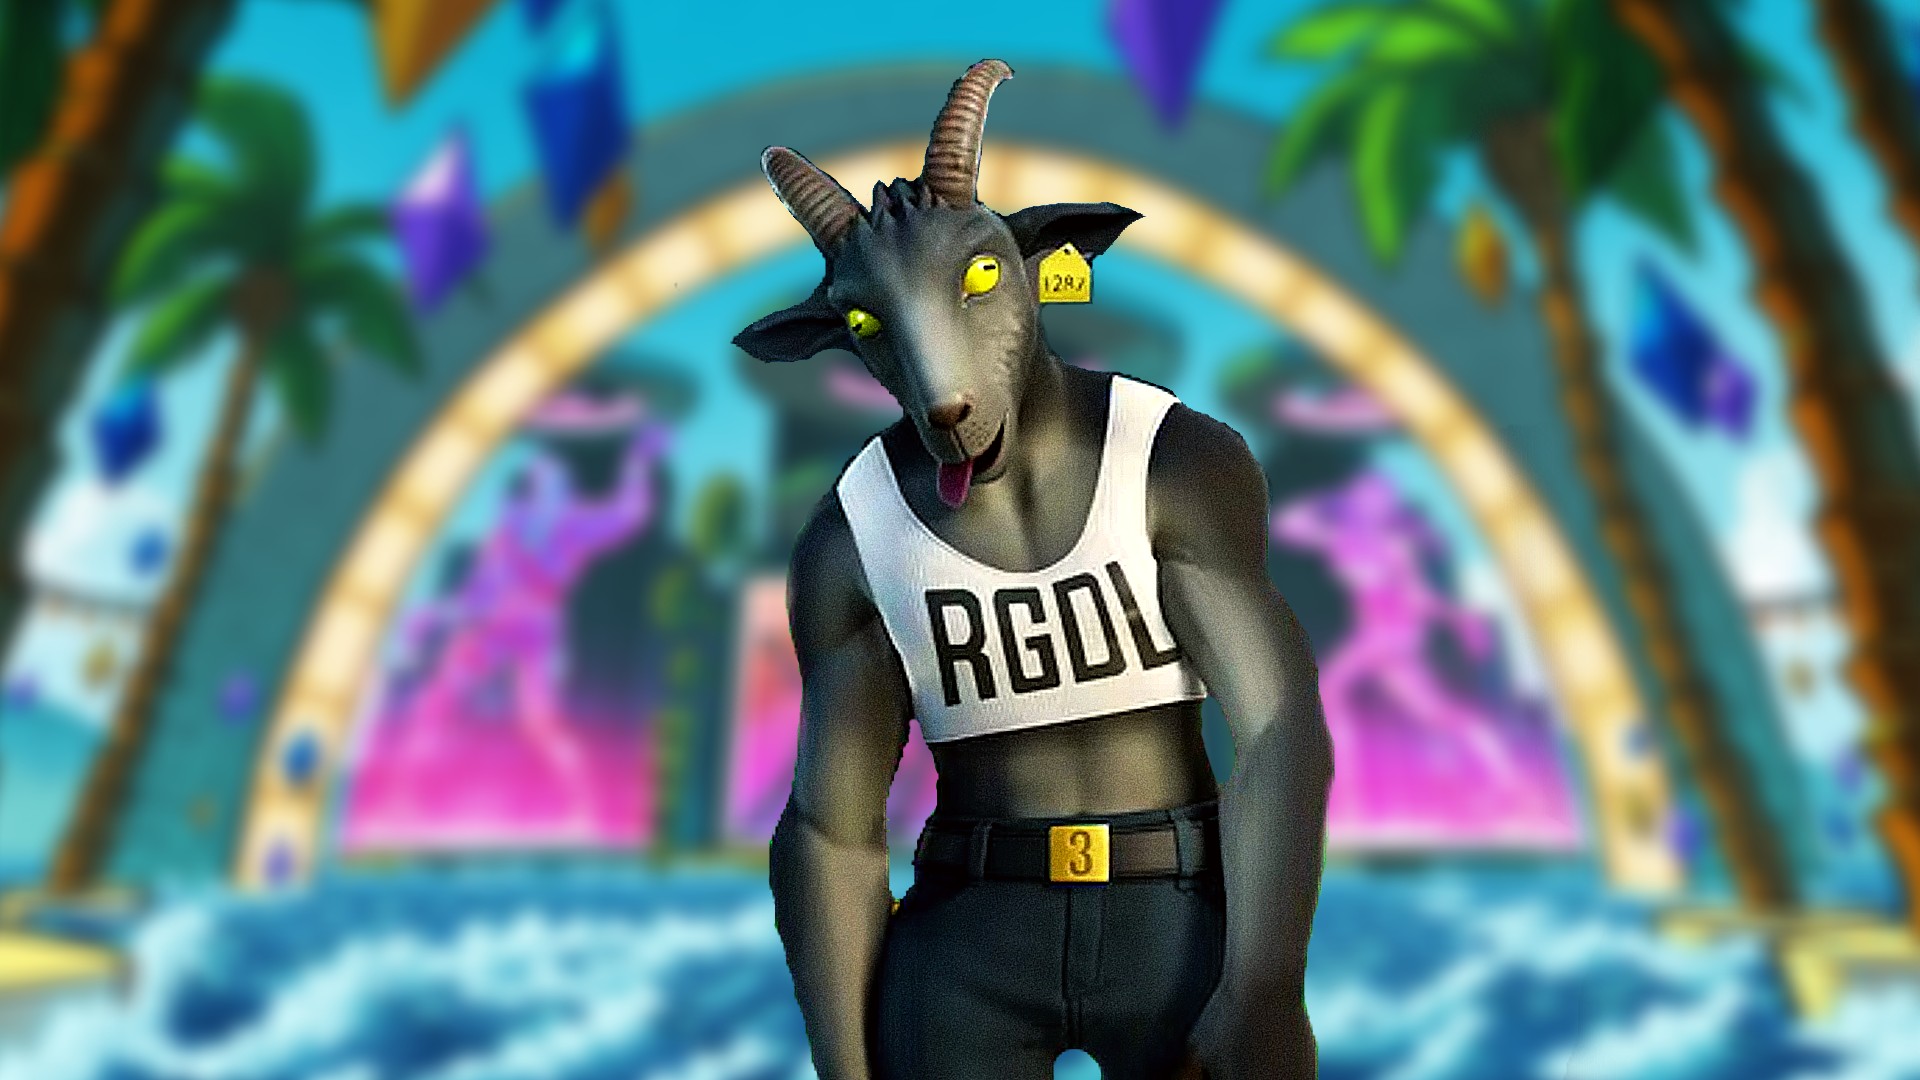 the-goat-from-goat-simulator-3-is-getting-her-own-fortnite-skin-the-loadout